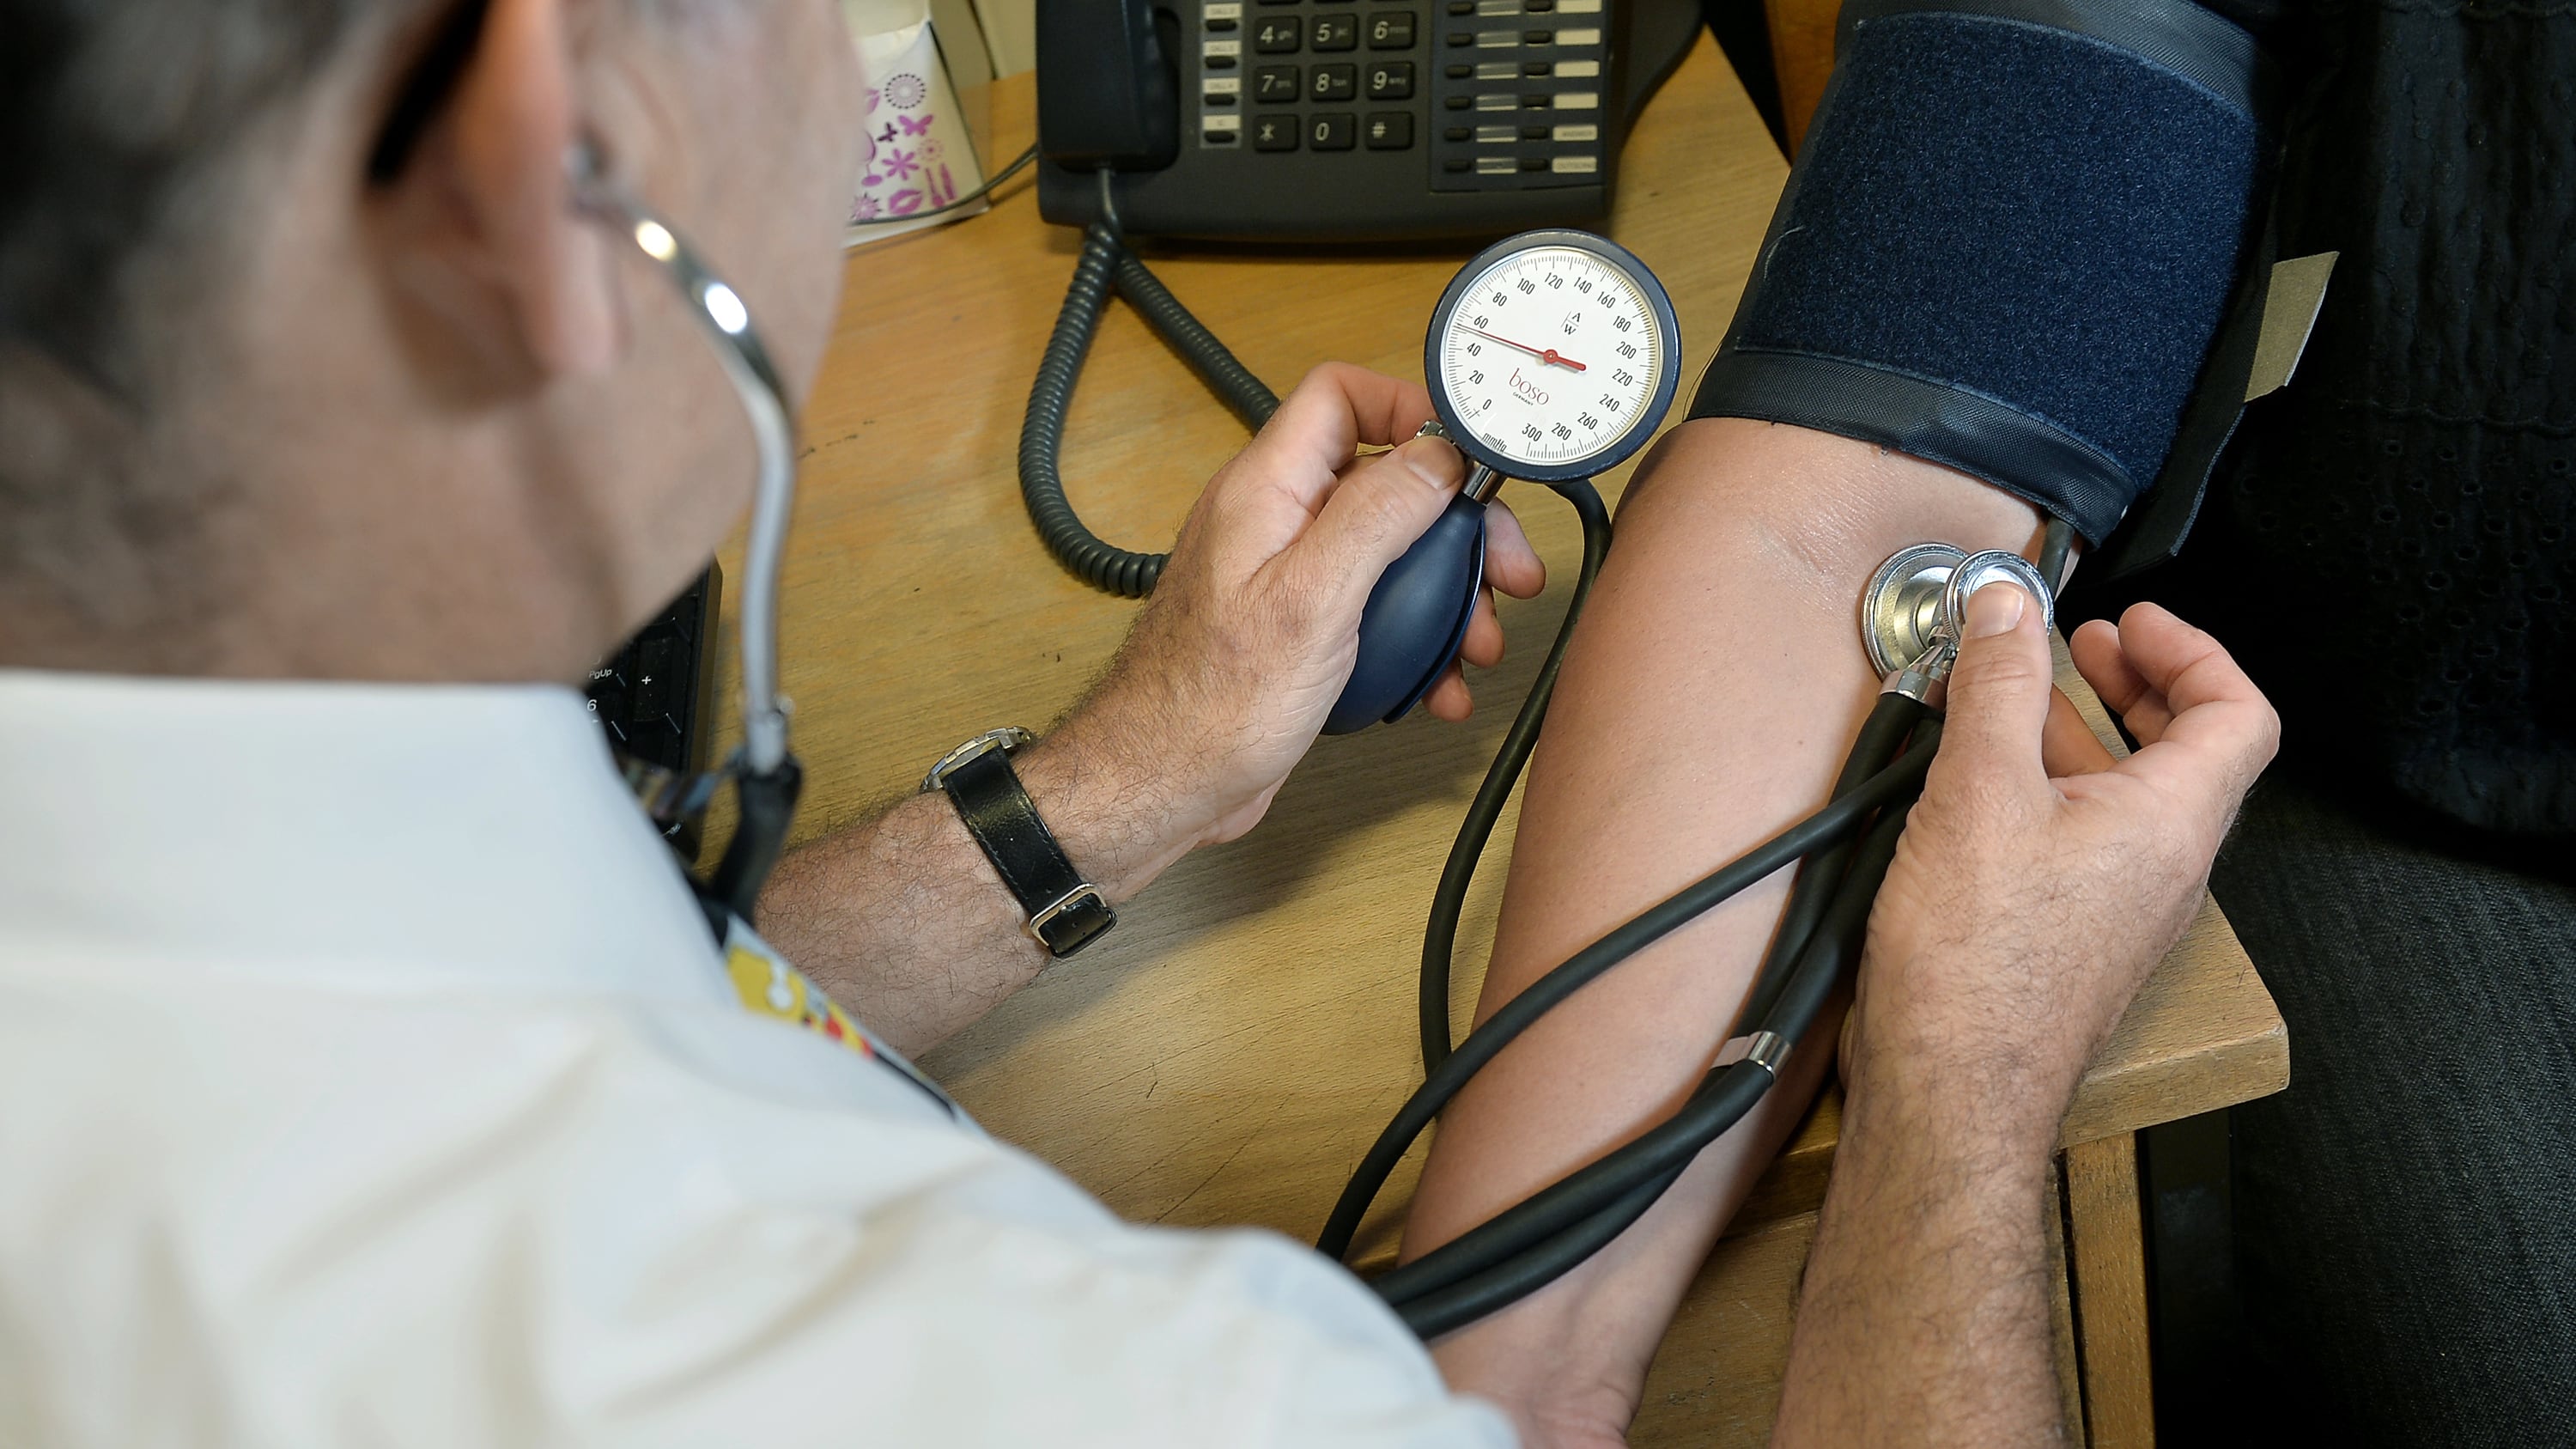 Concerns have been raised that GPs are ‘struggling’ to find work